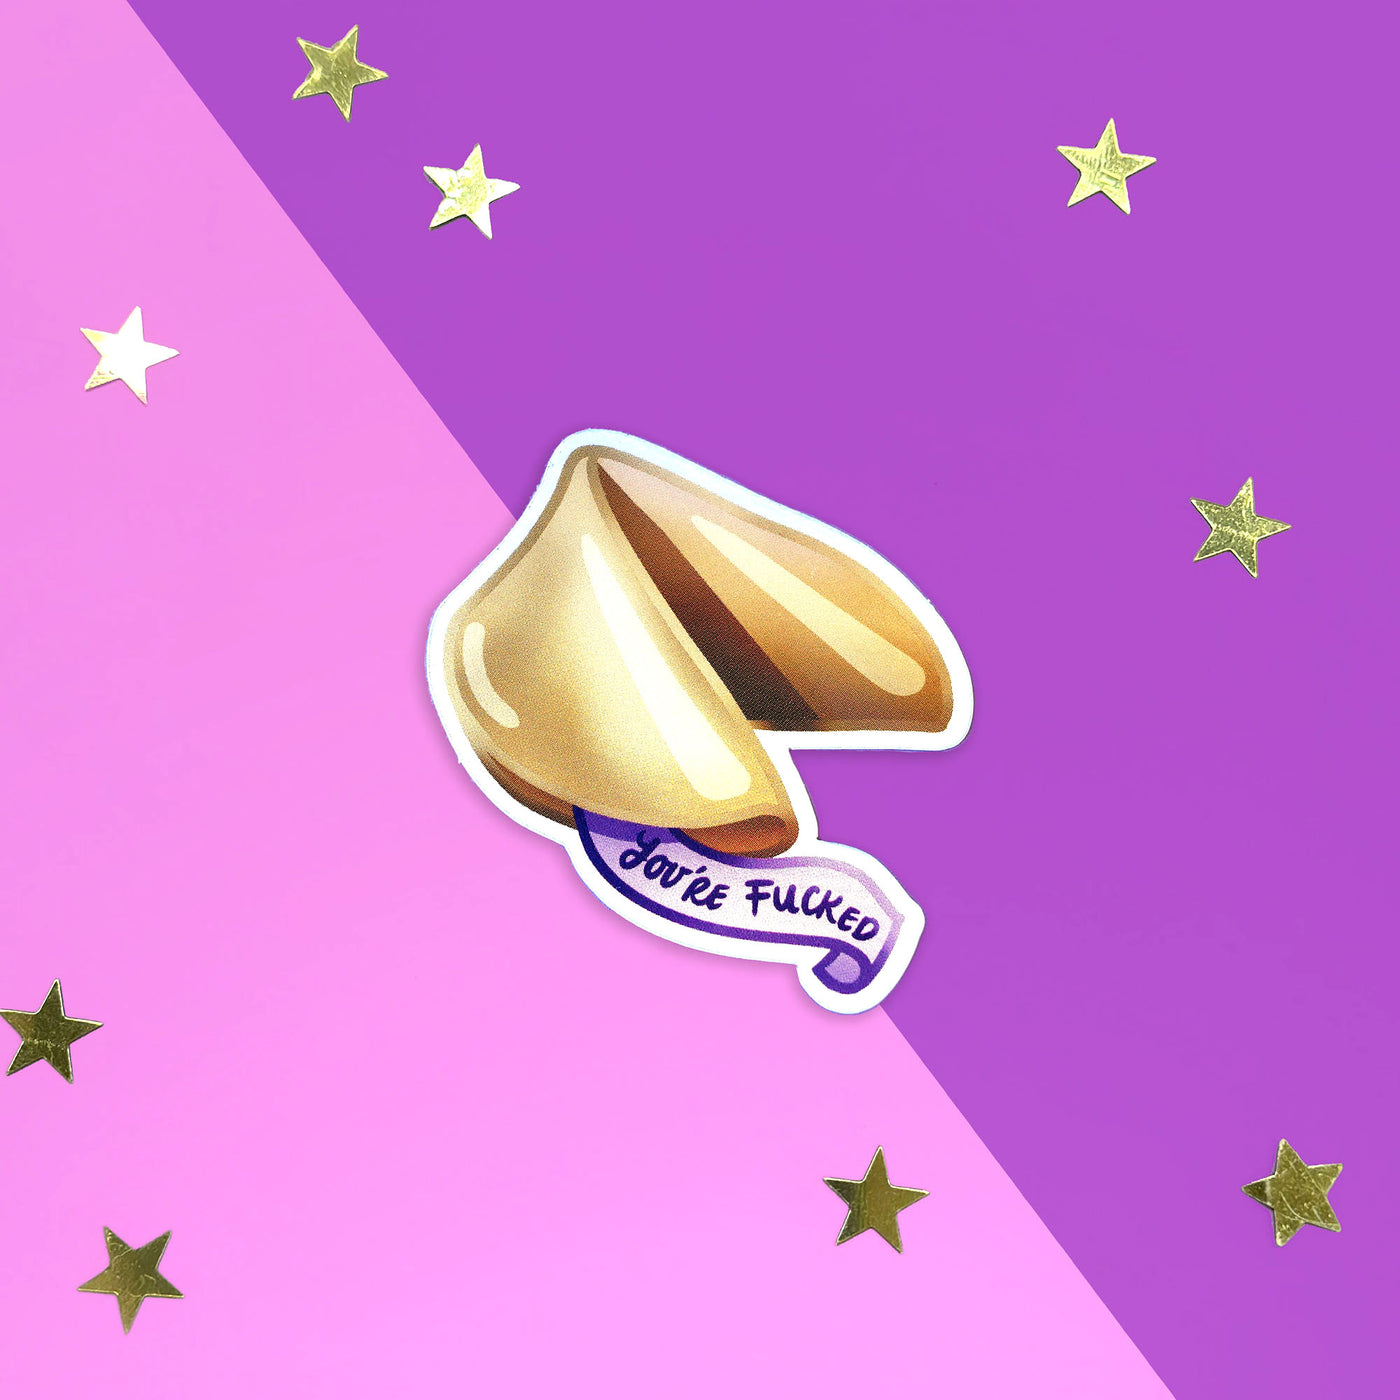 You're fucked Fortune Cookie  - Sticker - The Quirky Cup Collective